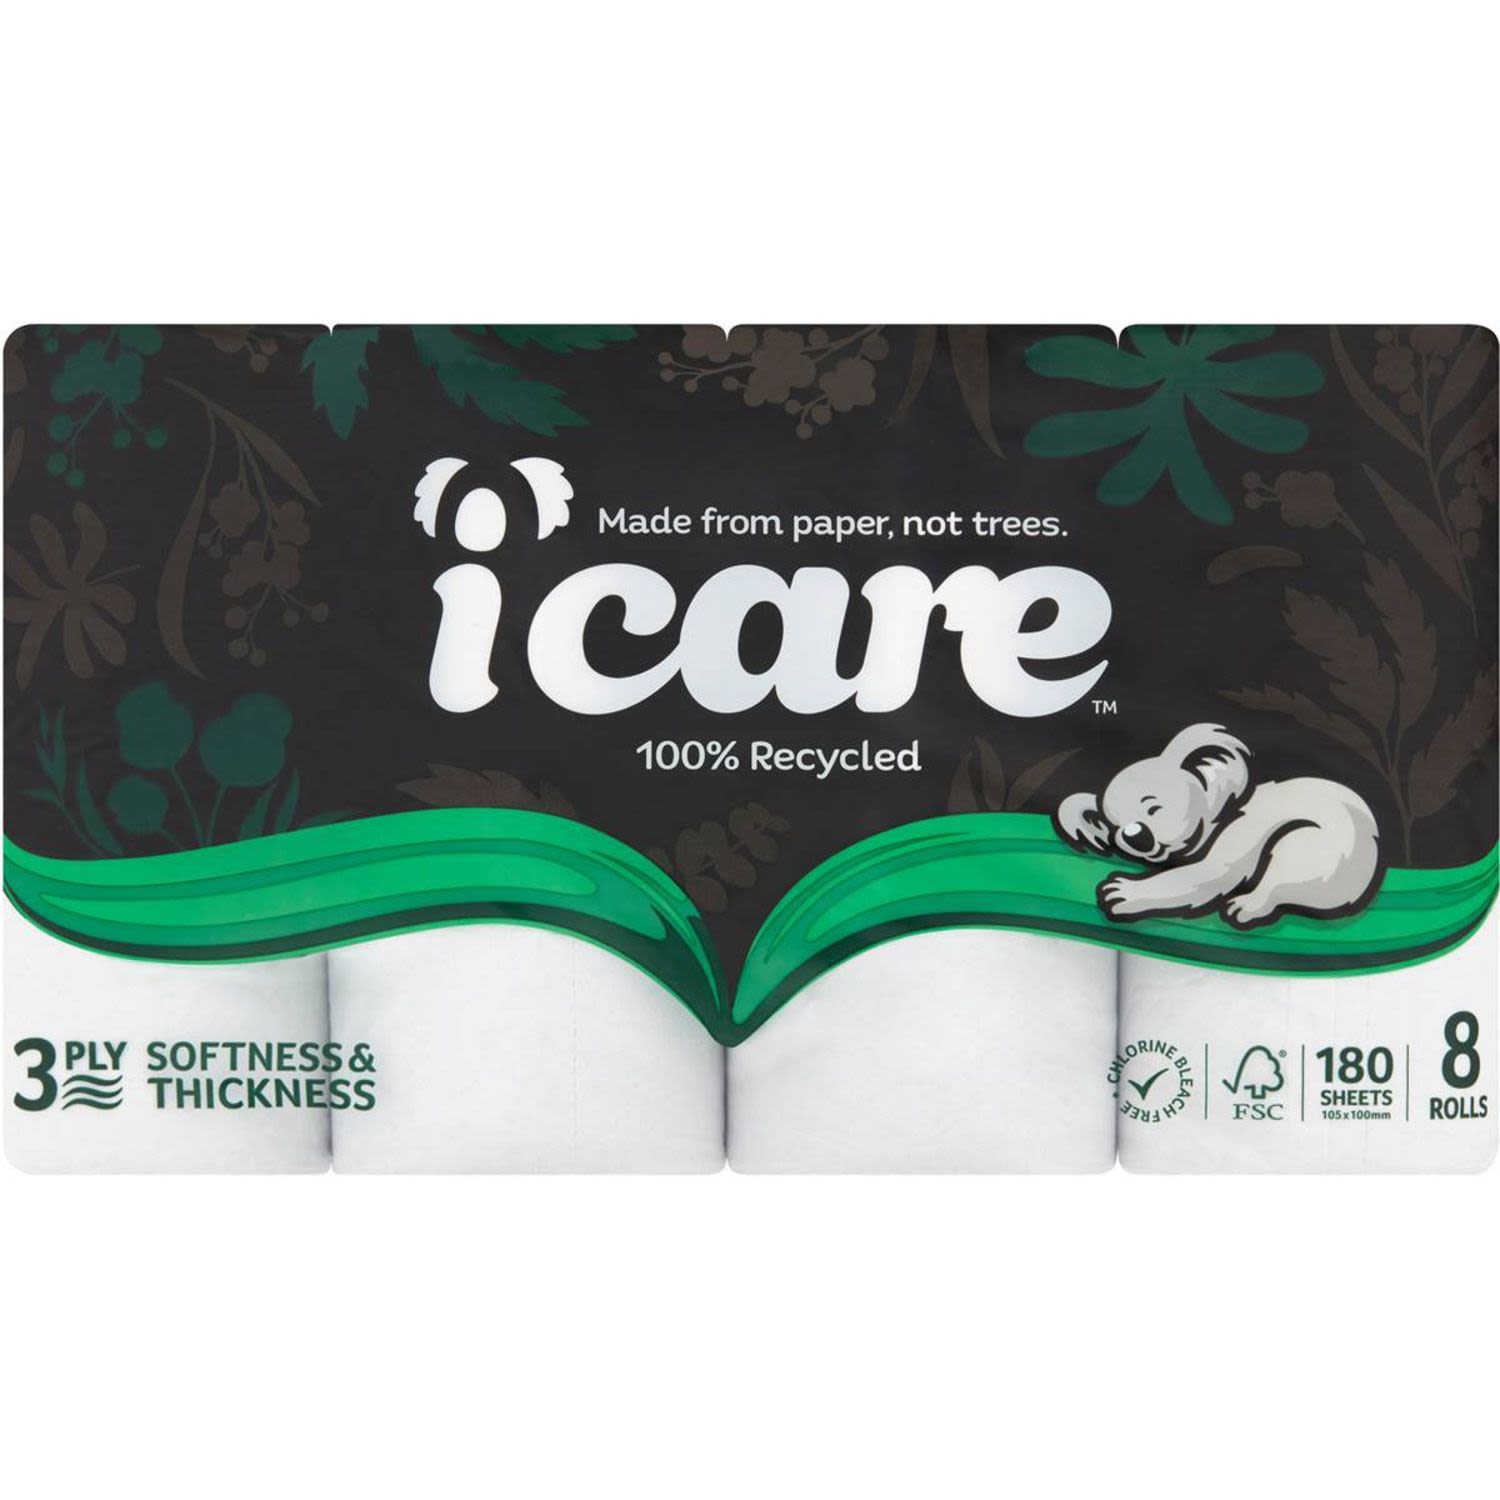 Icare 100% Recycled Toilet Tissue White 3 Ply, 8 Each